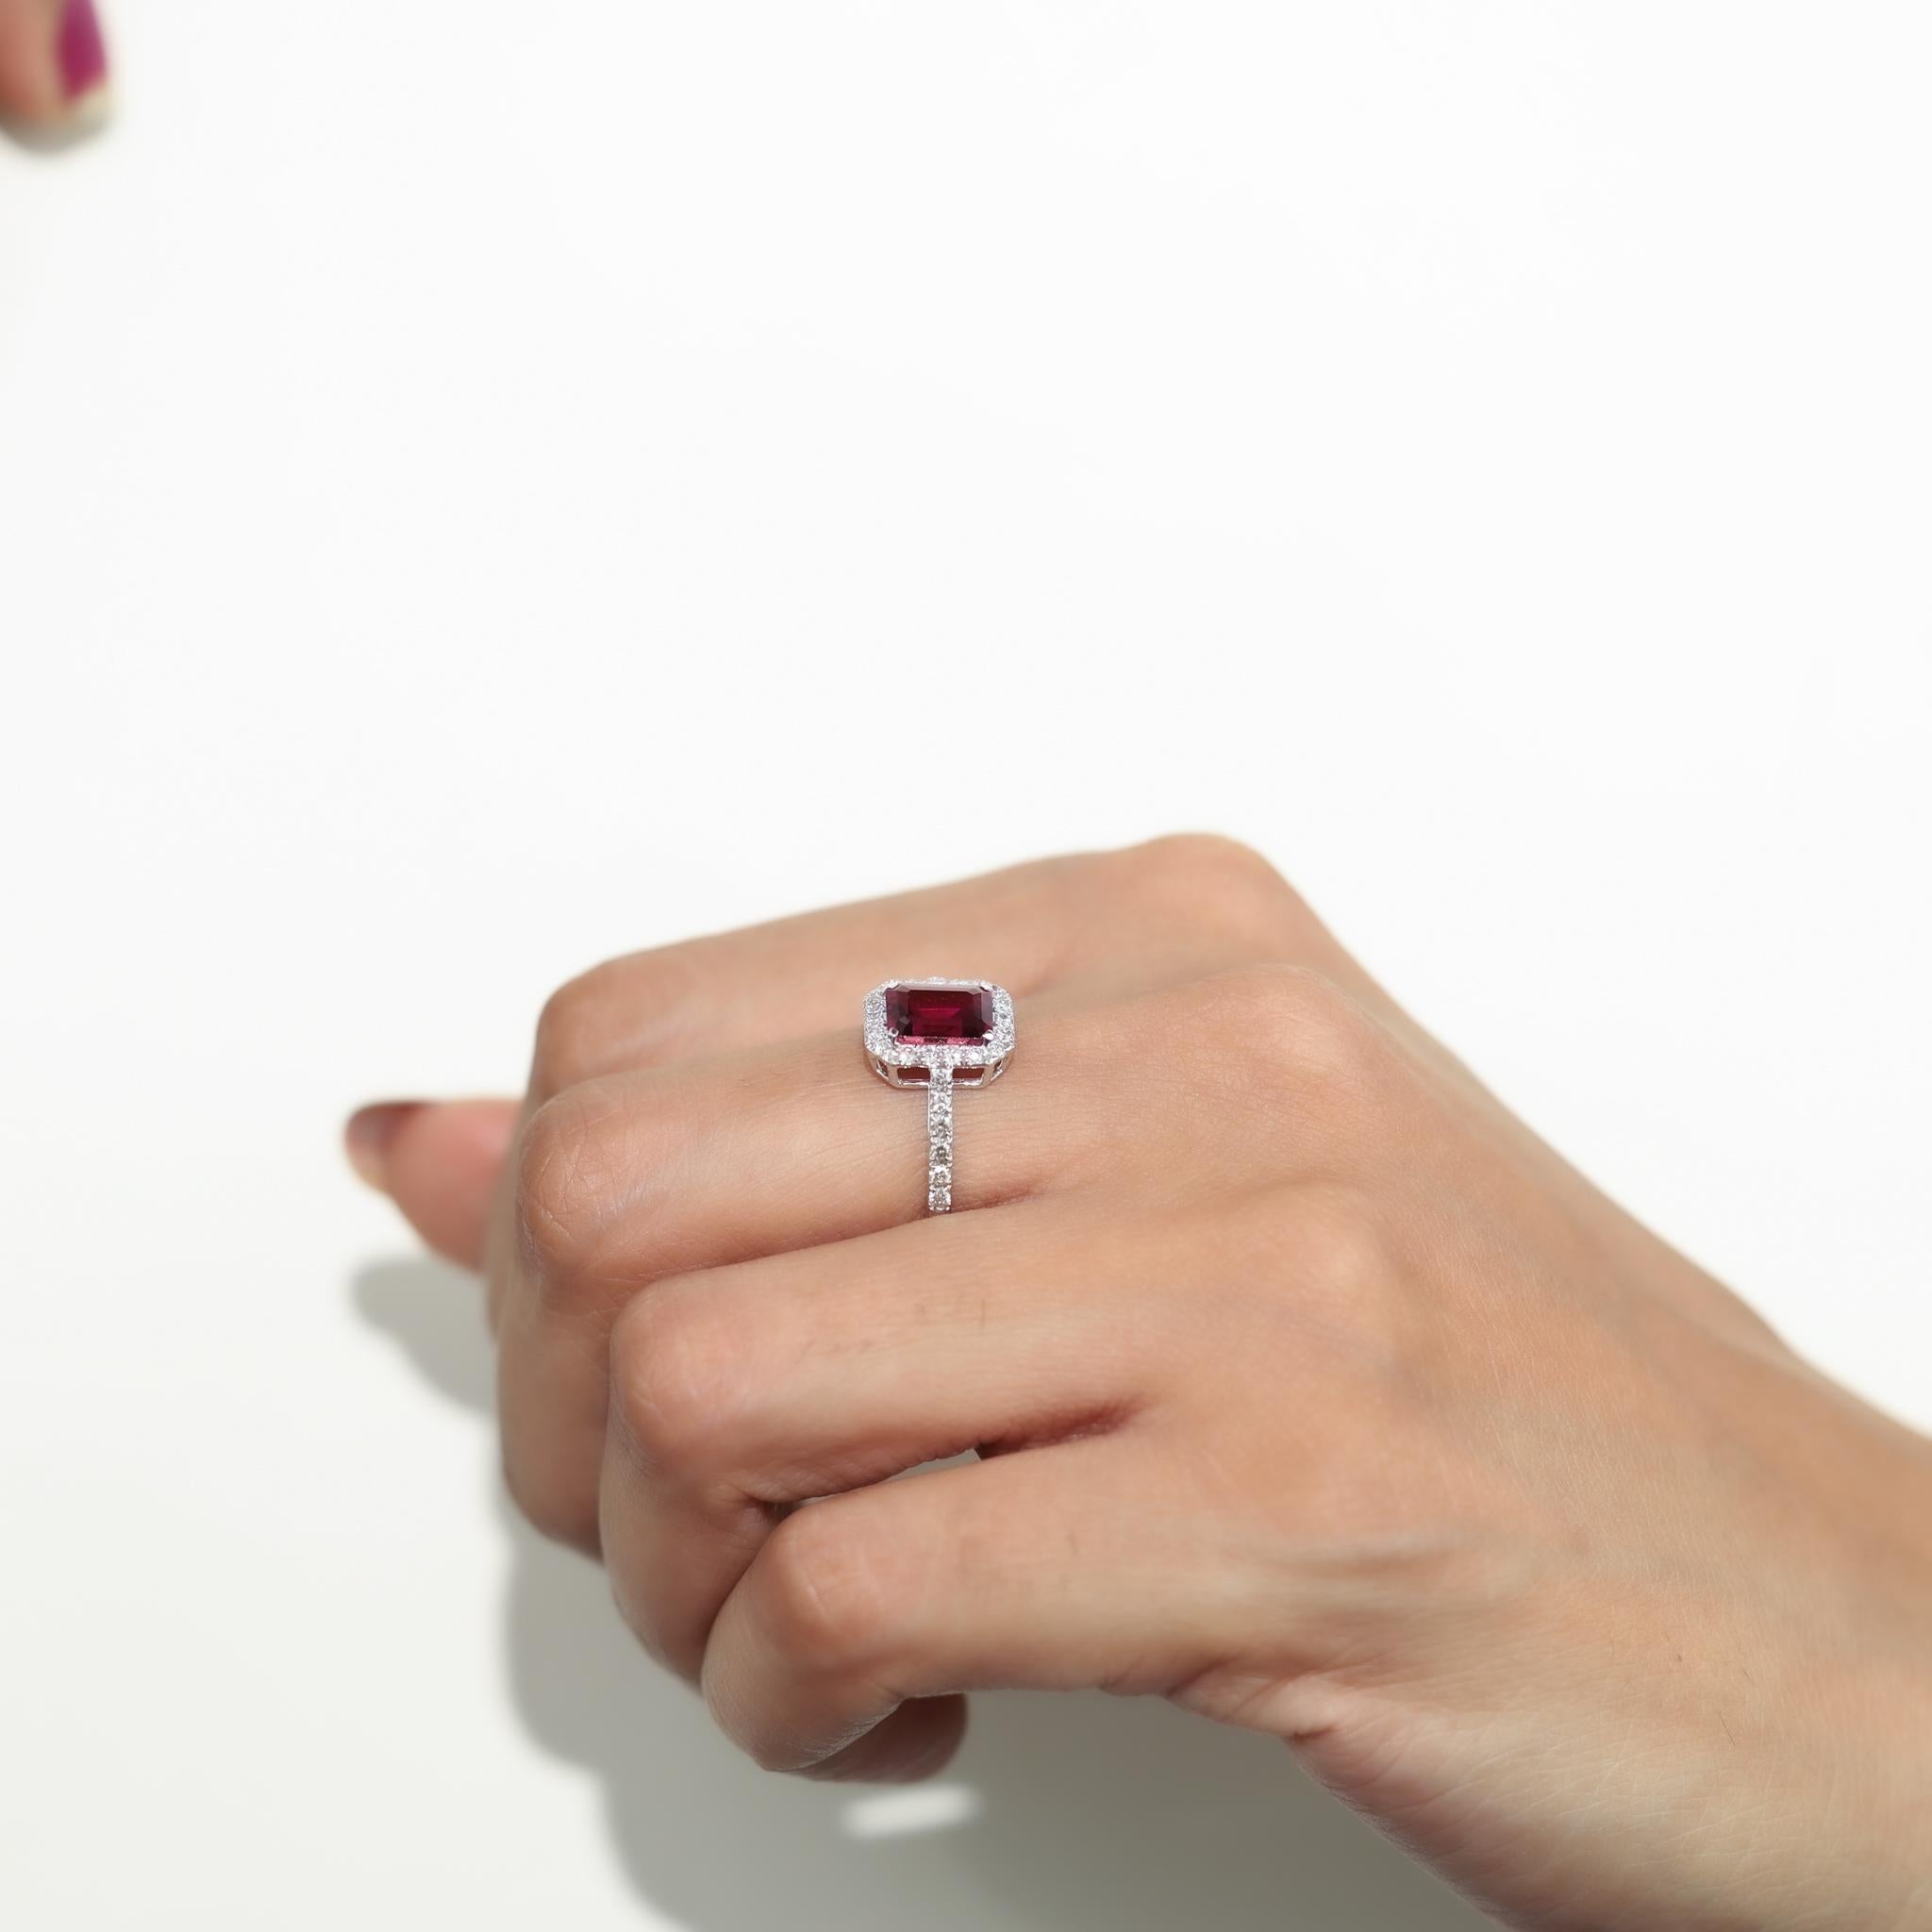 1.5 Carat Rubellite Tourmaline with 0.5Ct Diamonds Cocktail Ring 18k White For Sale 1